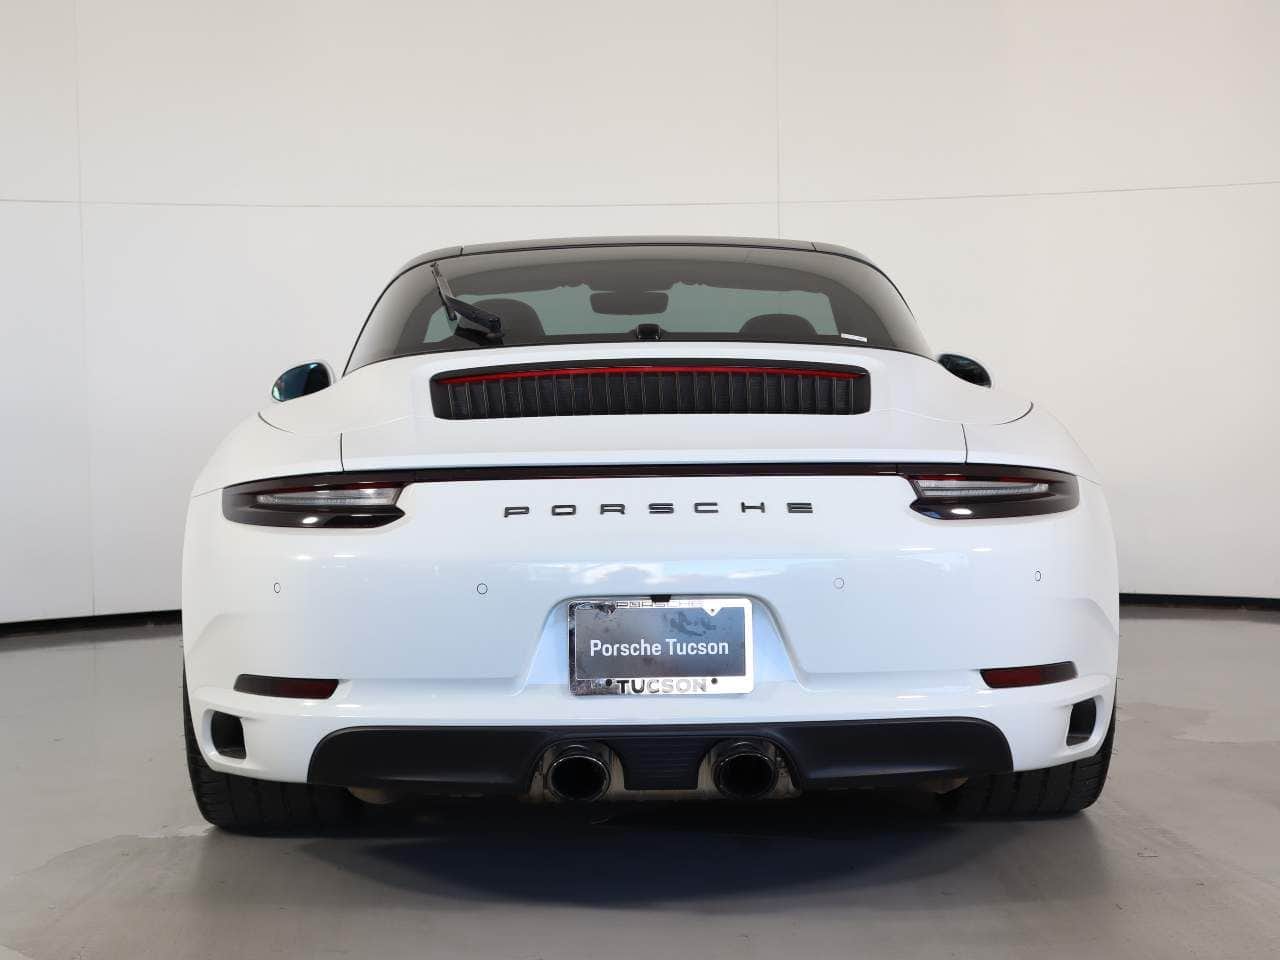 2019 Porsche 911 - Beautiful 2019 Targa 4S! Well Optioned! Front PPF! Excellent Condition! PDK! CPO Avai - Used - Tucson, AZ 85711, United States